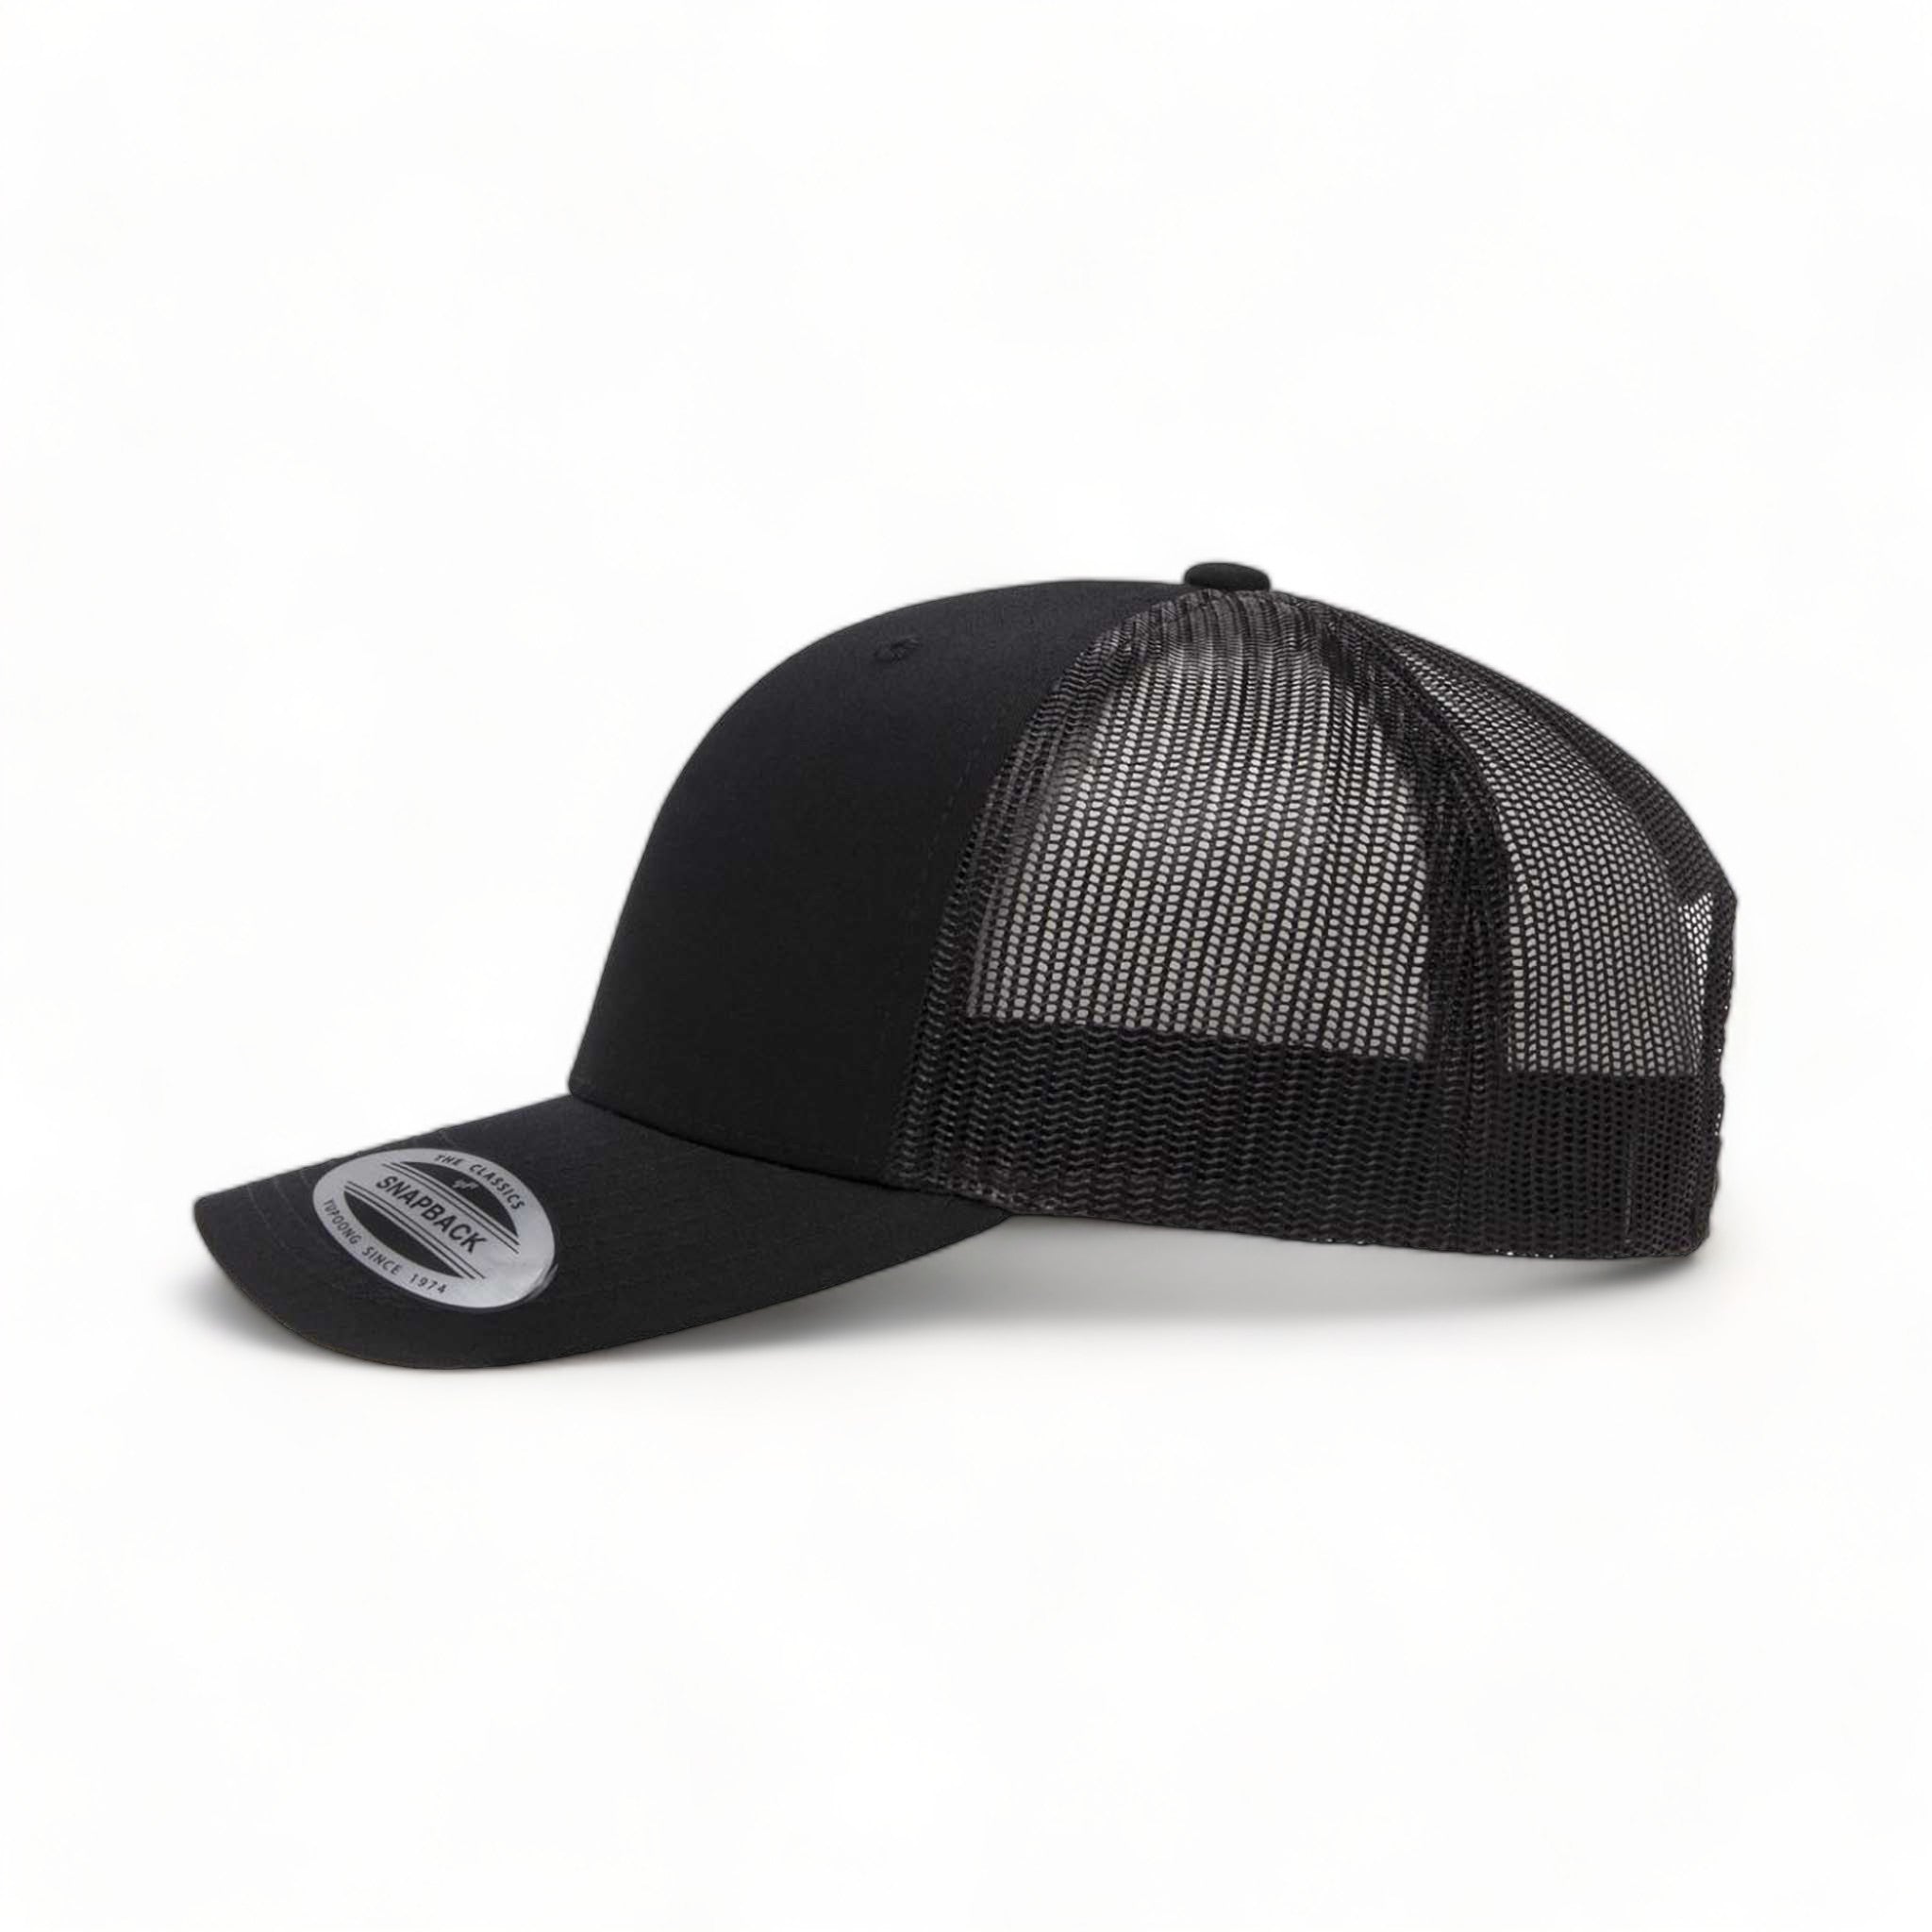 Side view of YP Classics 6606 custom hat in black